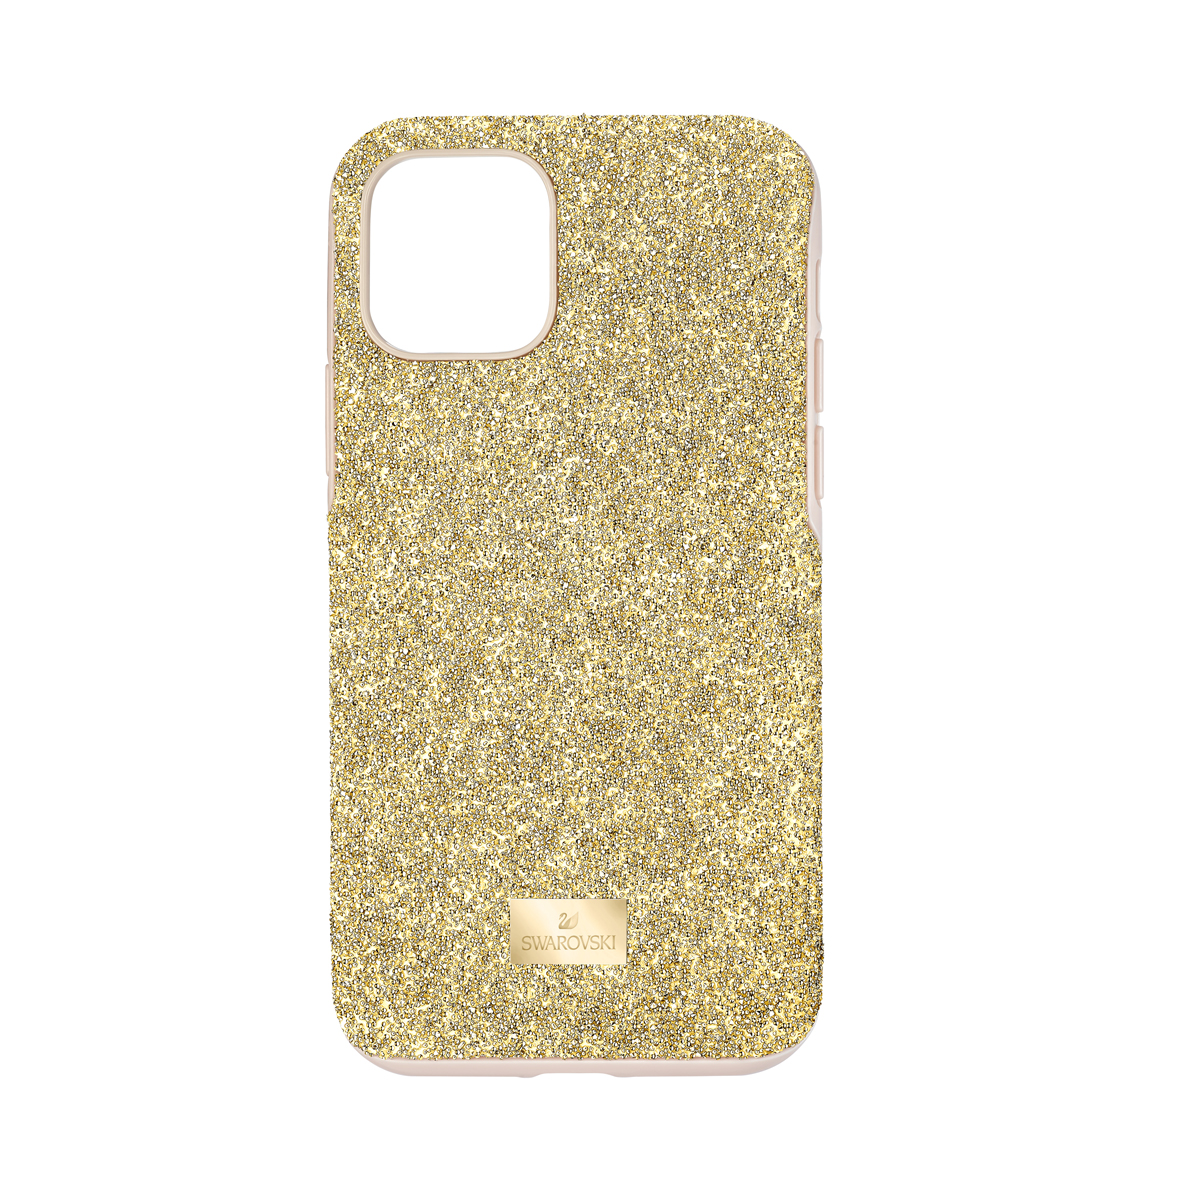 Swarovski Mobile Phone Case High iPhone 11 Pro Case Gold Stainless Steel Shiny Gold